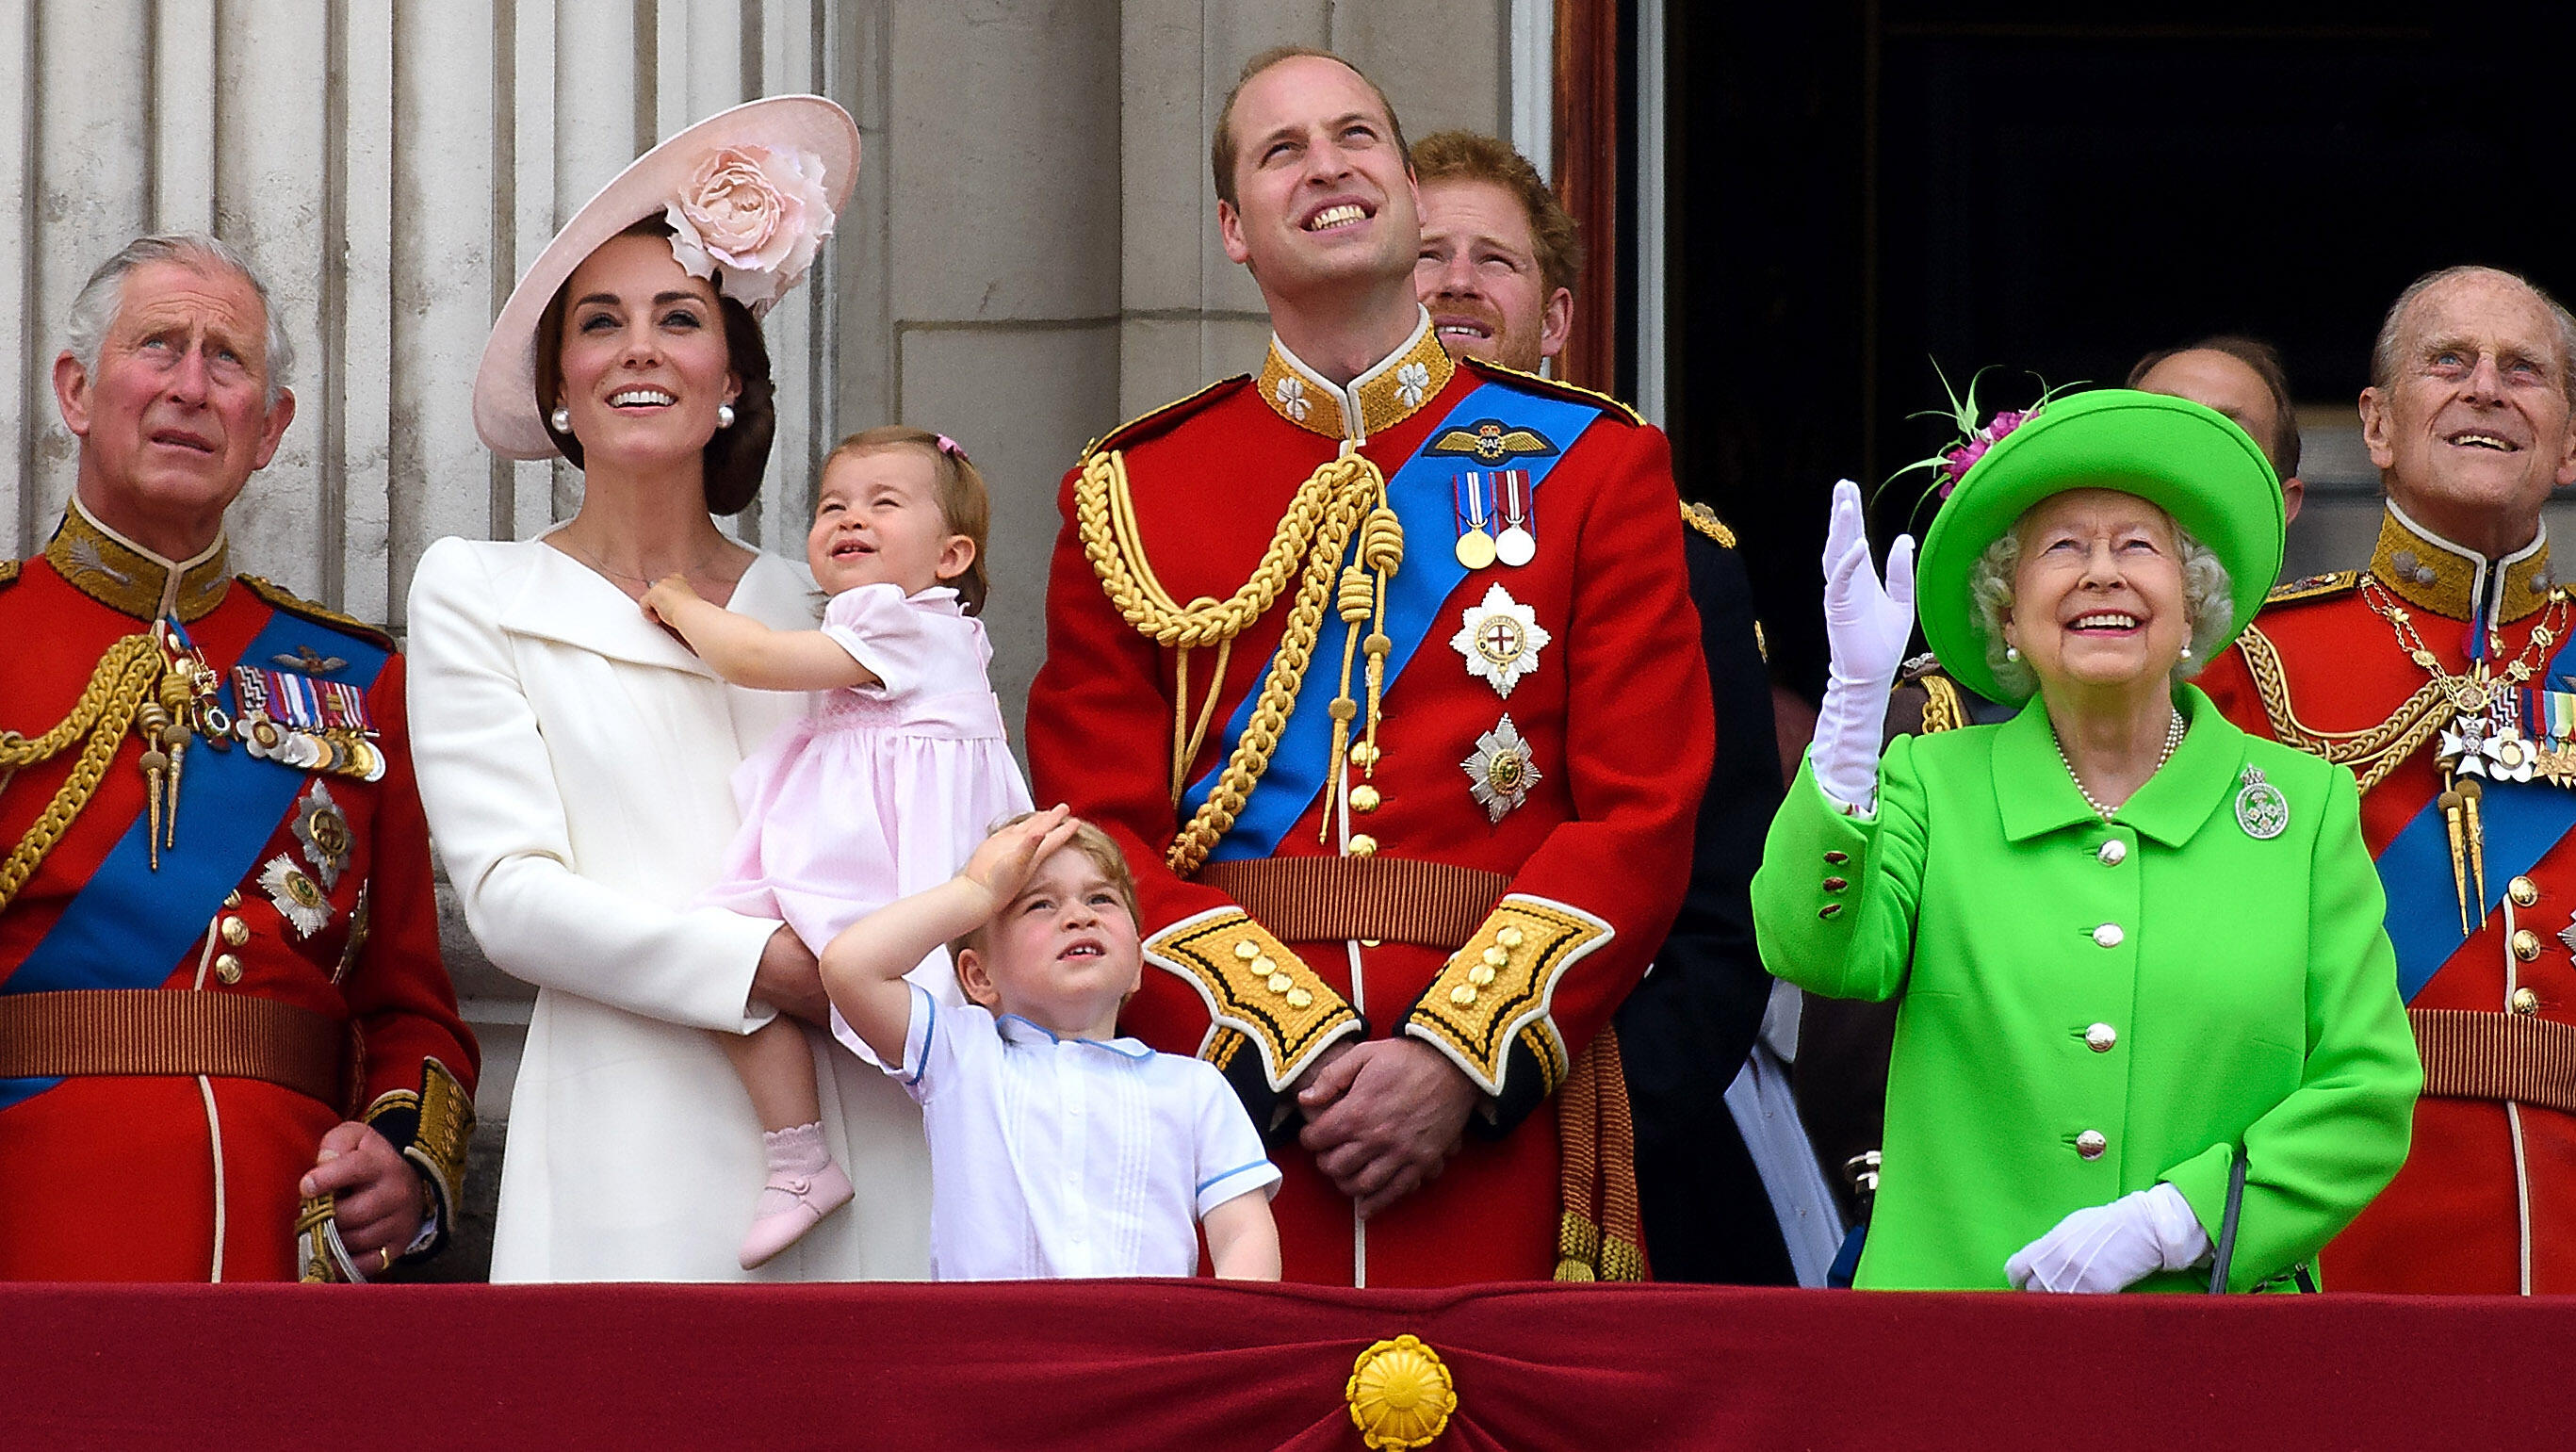 LONDON, ENGLAND - JUNE 11:  (L-R) Prince Charles, Prince of Wales, Catherine, Duchess of Cambridge, Princess Charlotte, Prince George, Prince William, Duke of Cambridge, Prince Harry, Queen Elizabeth II and Prince Philip, Duke of Edinburgh stand on the ba